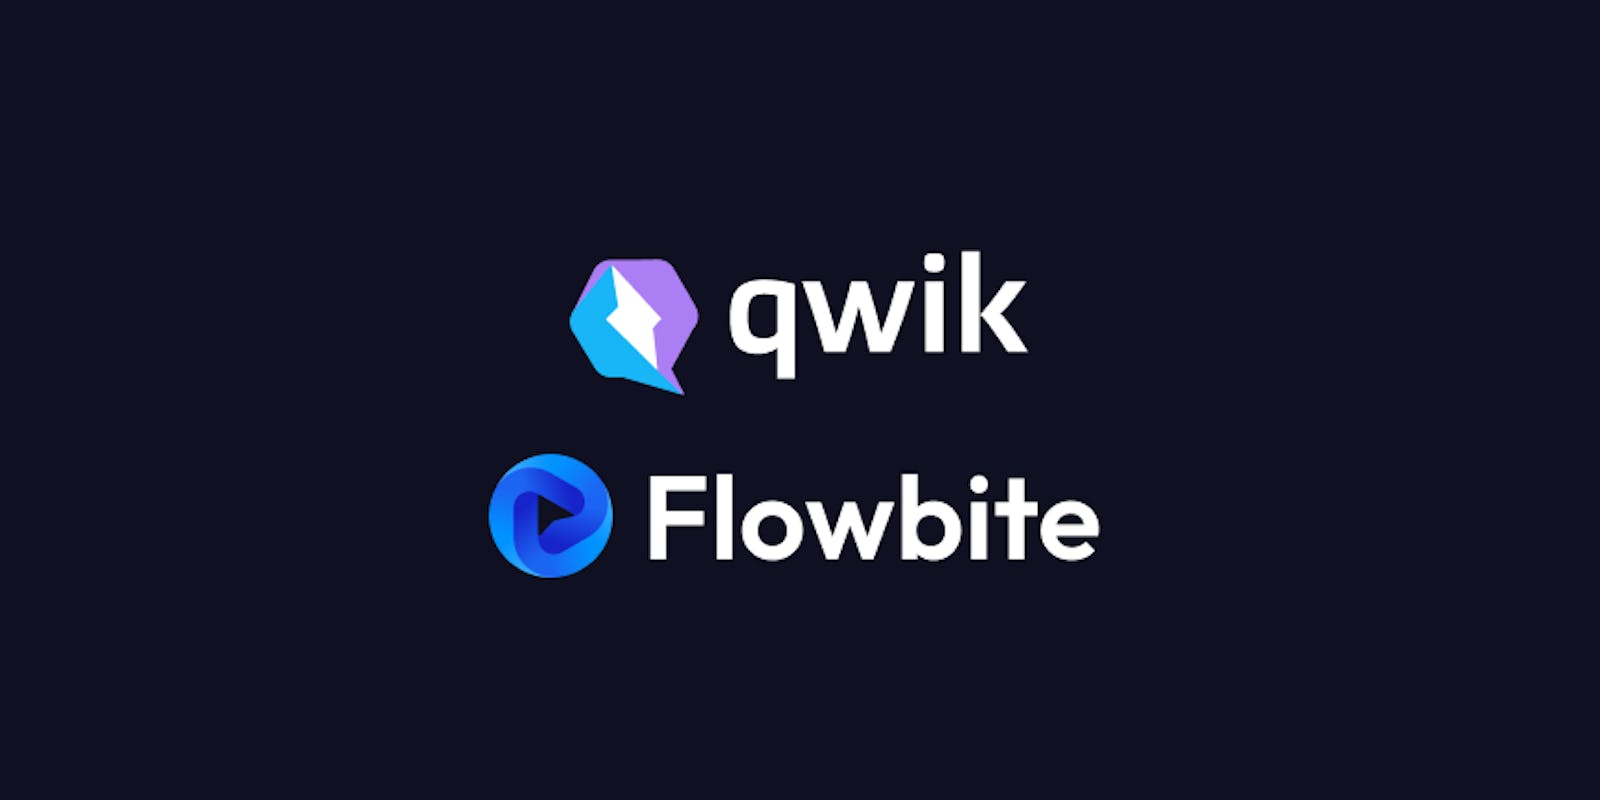 How to set up Tailwind CSS and Flowbite with a new Qwik project